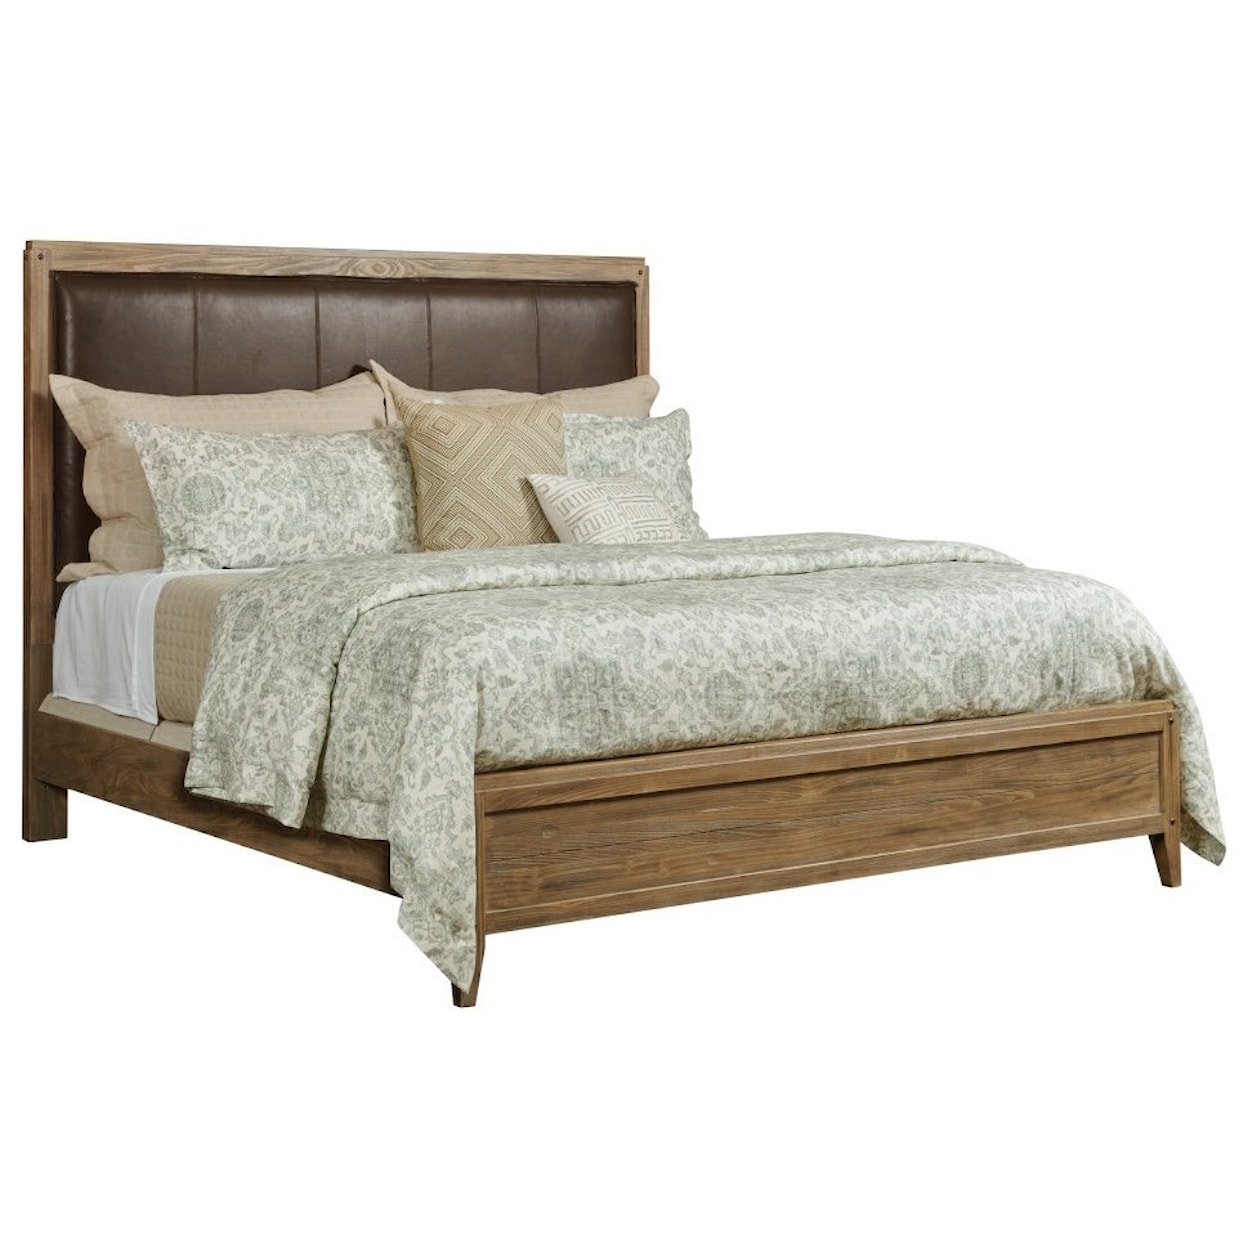 Kincaid Furniture Modern Forge Longview Upholstered Queen Bed